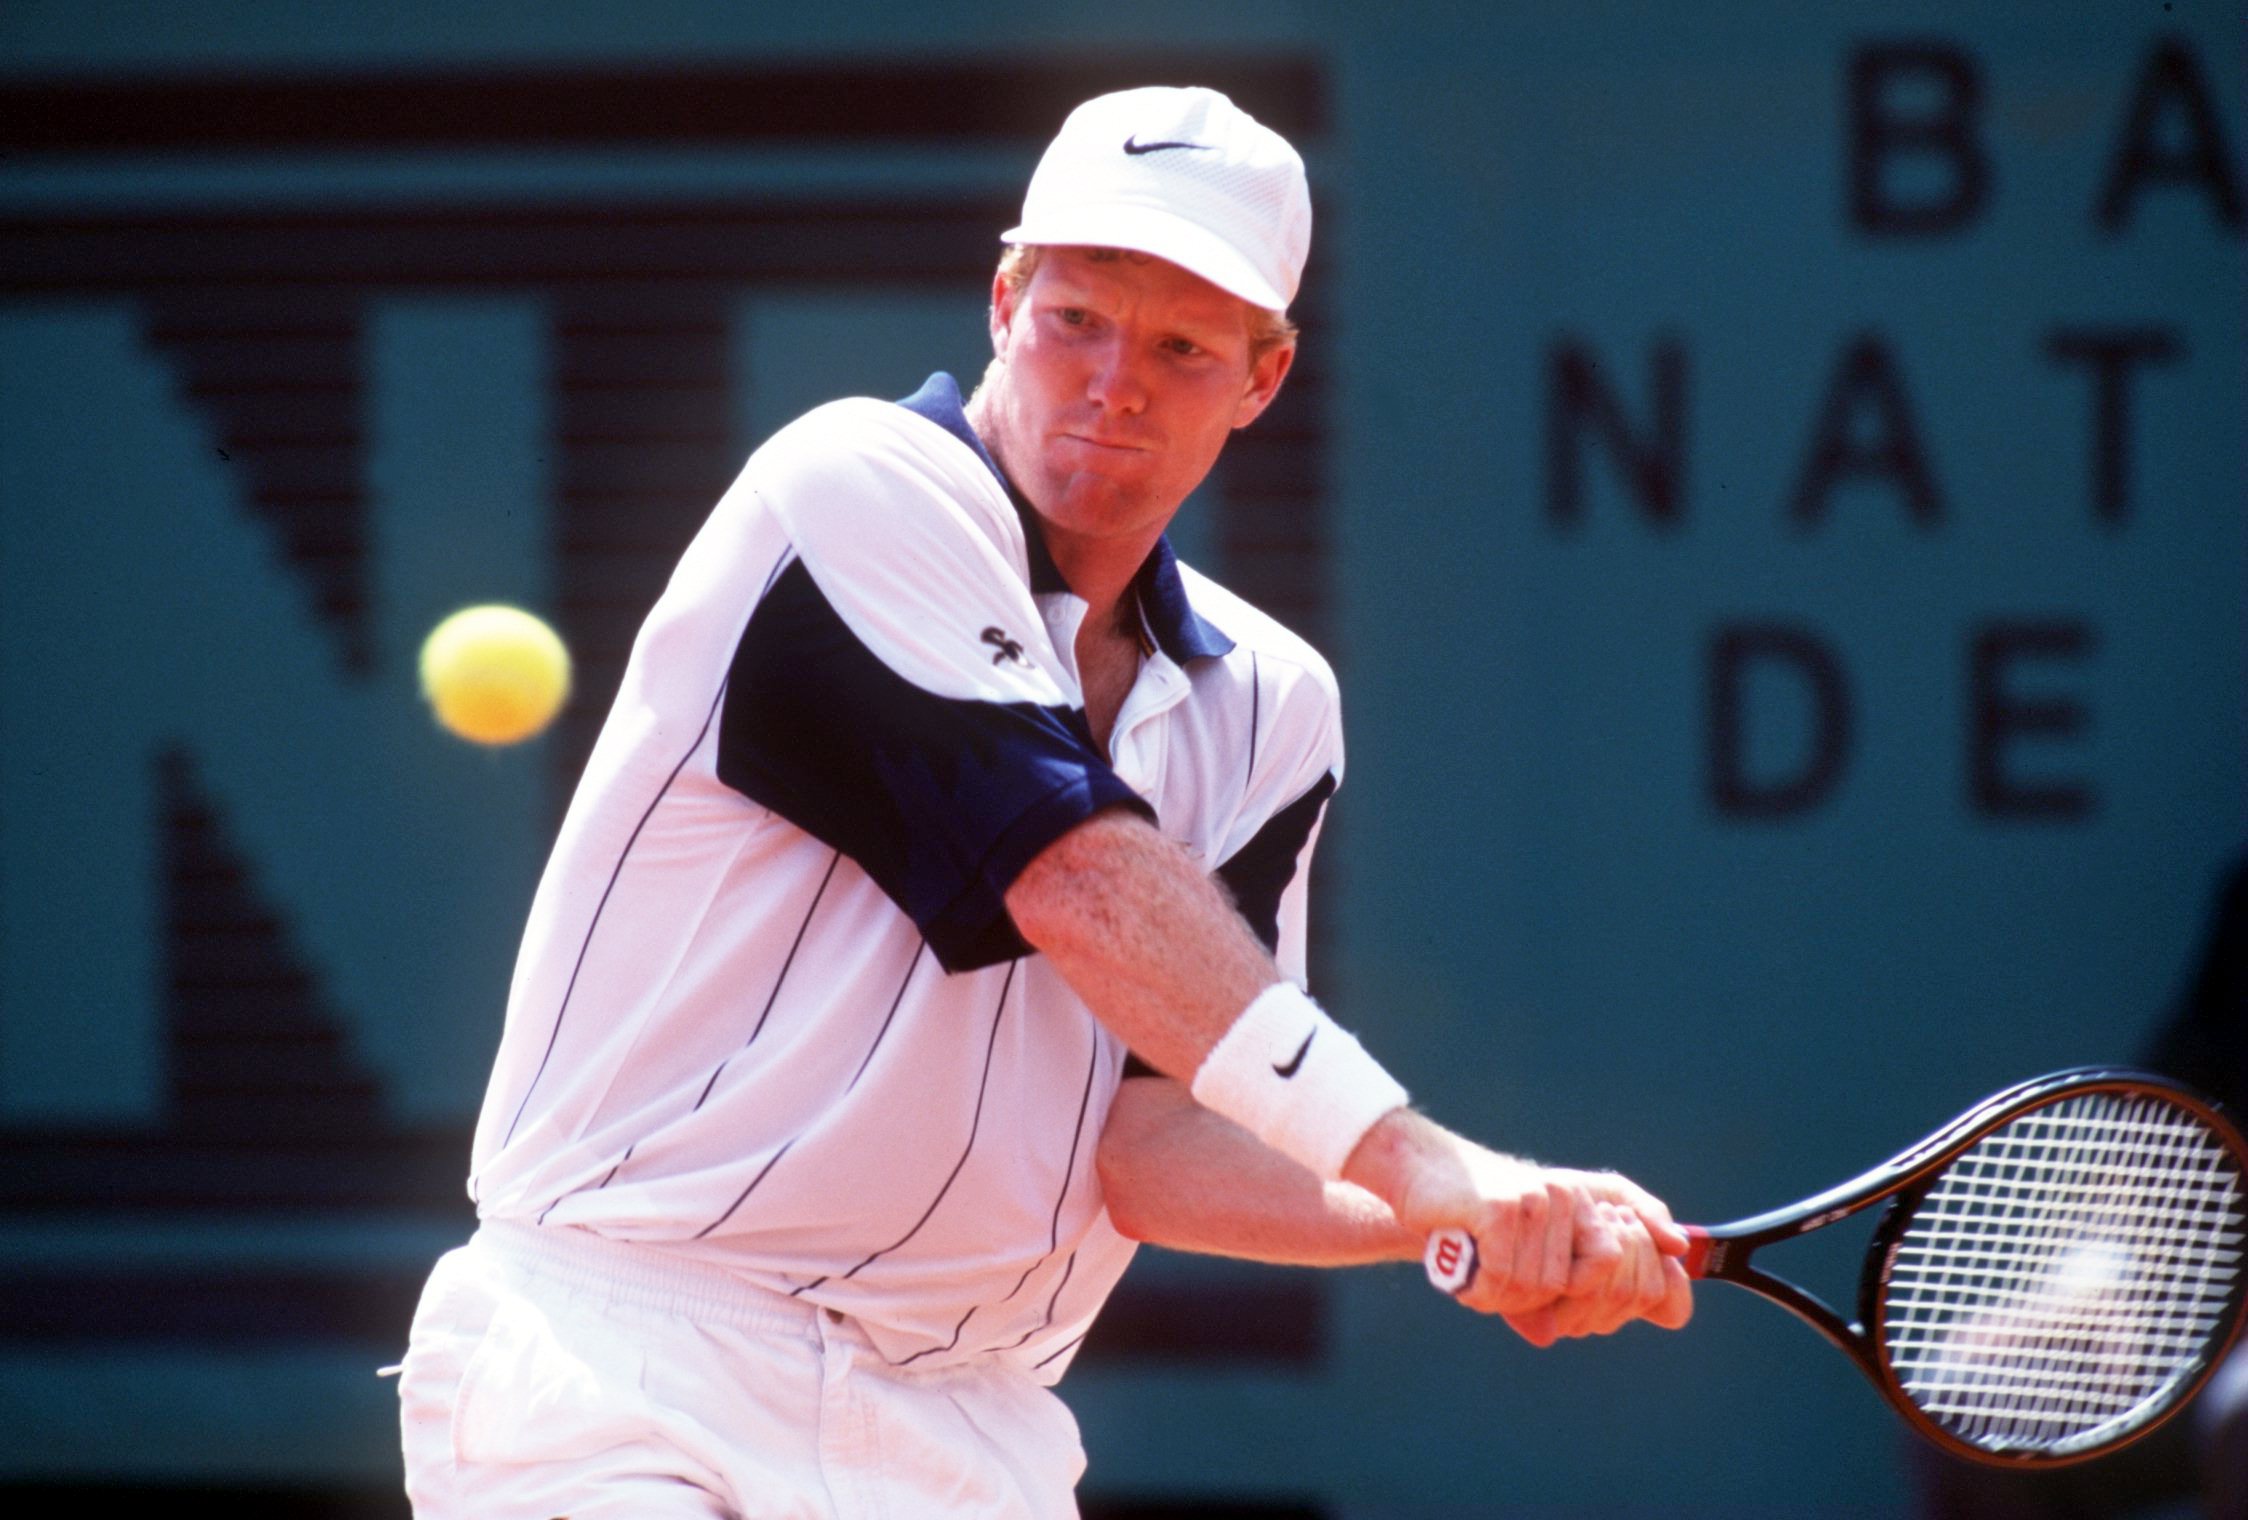 3 JUN 1994:  JIM COURIER OF THE USA  KEEPS HIS EYES ON THE BALL AS HE HITS A DOUBLEHANDED RETURN DURING HIS DEFEAT TO SERGI BRUGUERA OF SPAIN IN THREE STRAIGHT SETS IN THE FIRST OF THE MENS SEMIFINALS AT THE FRENCH OPEN TENNIS AT ROLAND GARROS IN PARIS.Ma